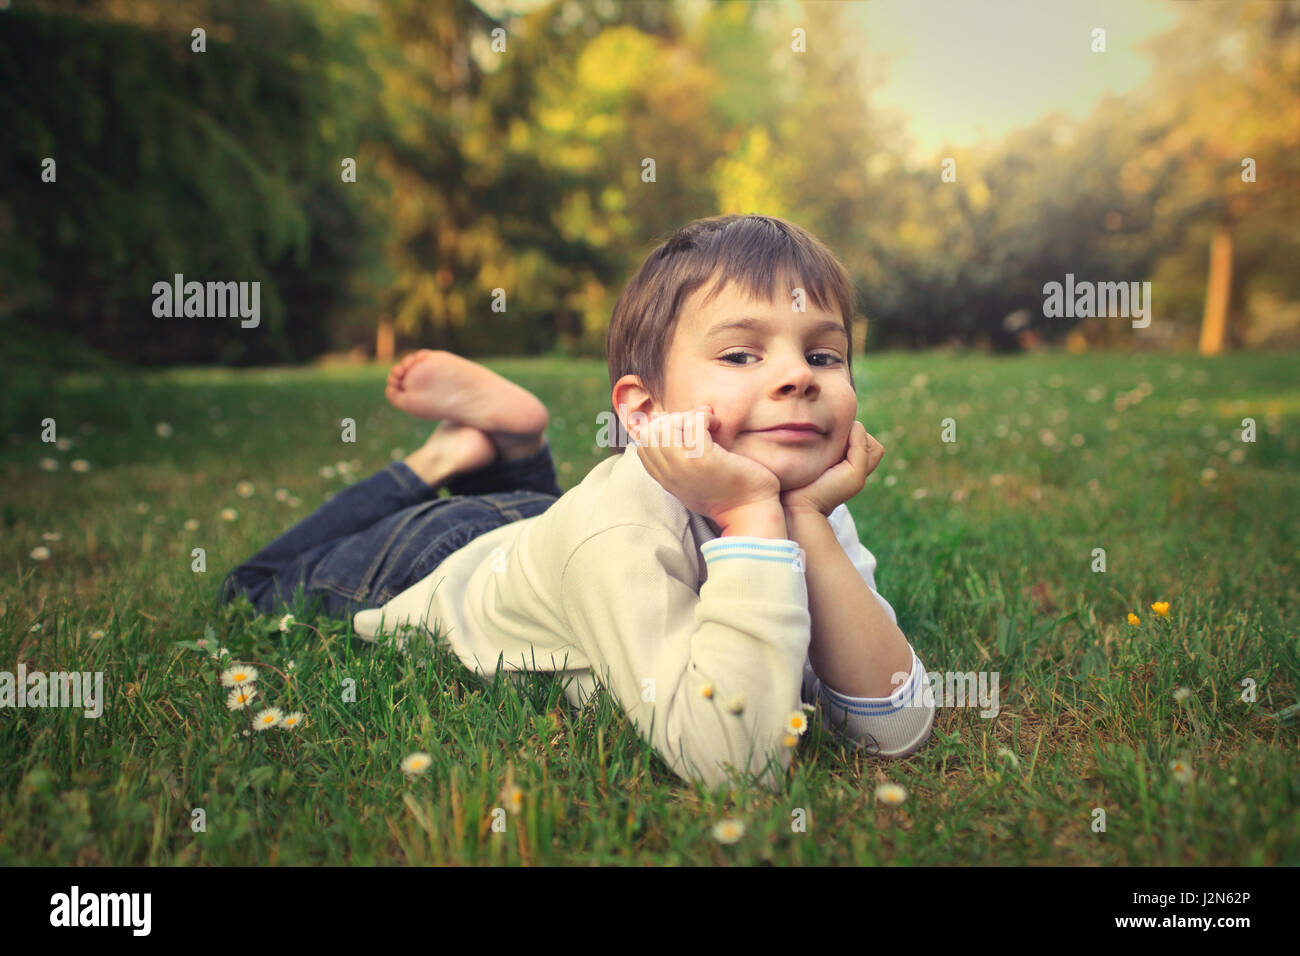 Little boy laying on the grass Stock Photo